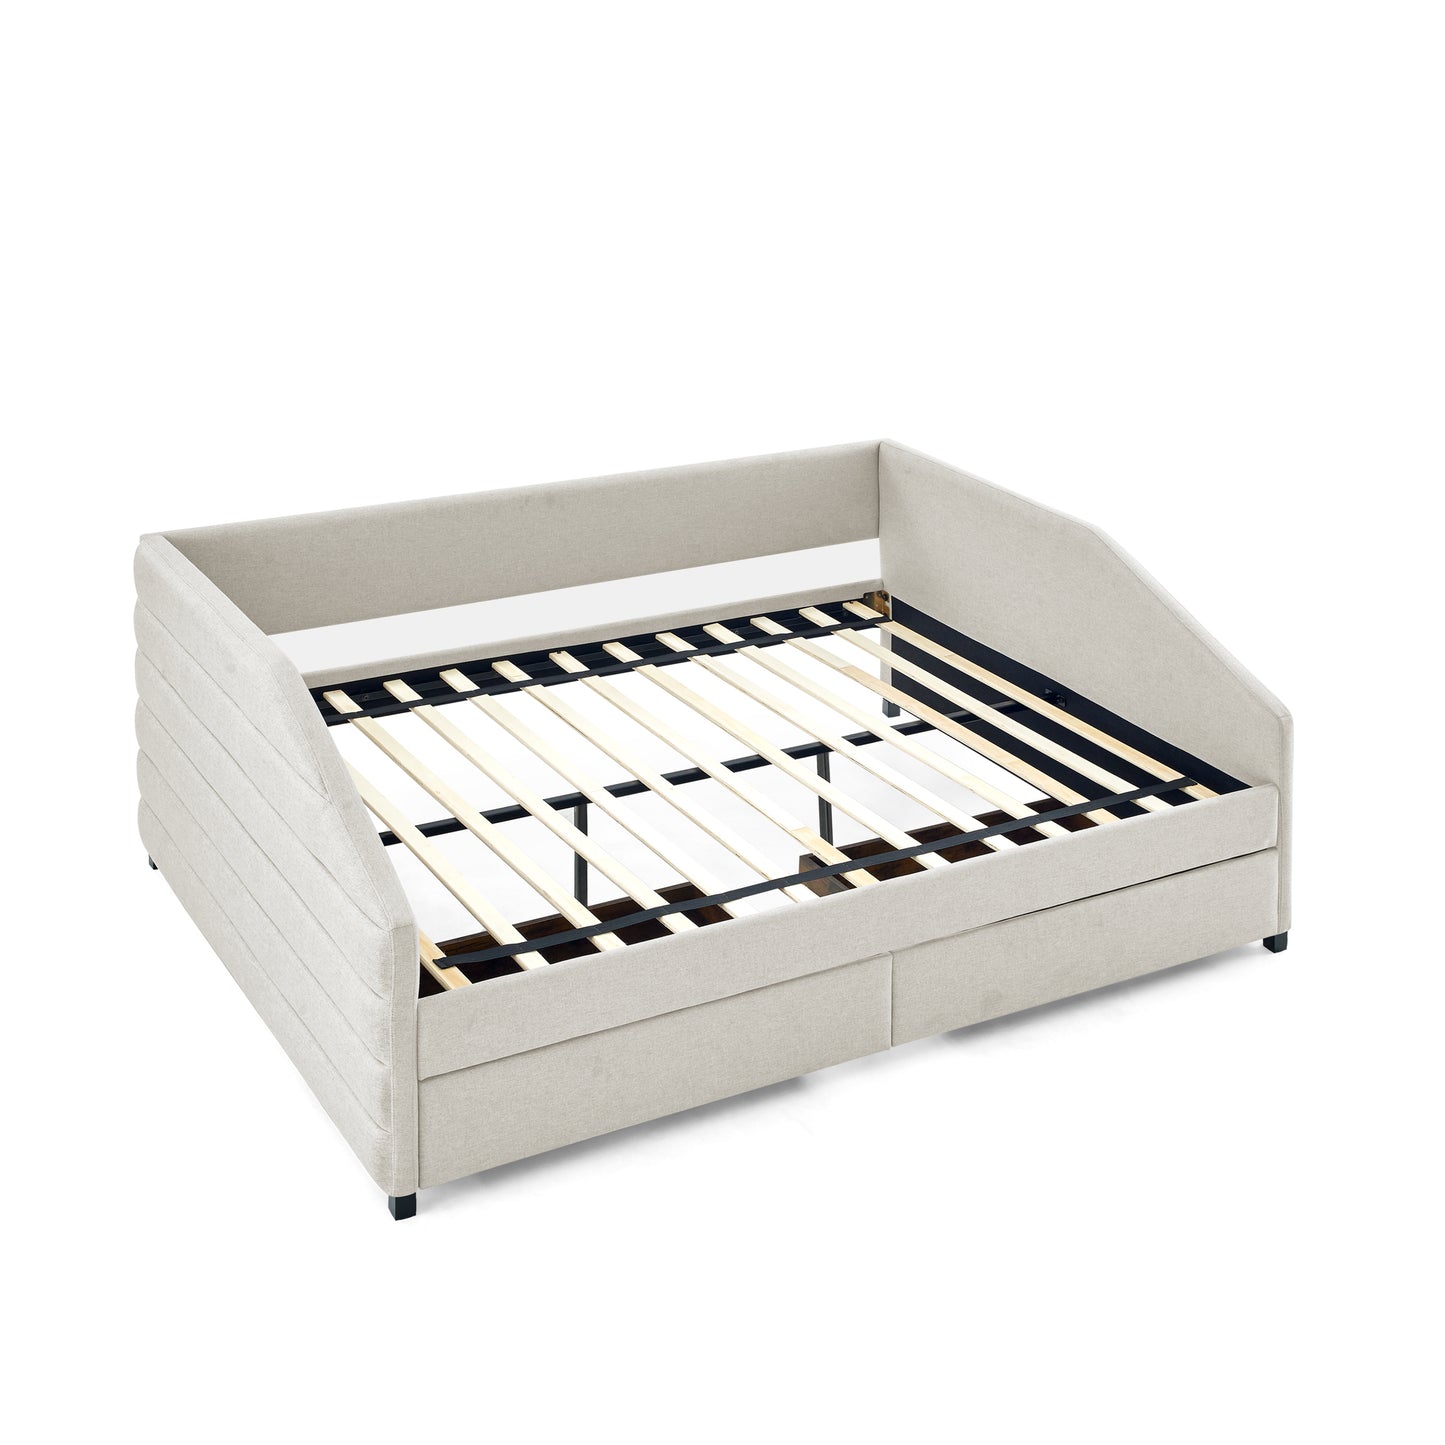 Lined Beige Daybed with Drawers (queen)